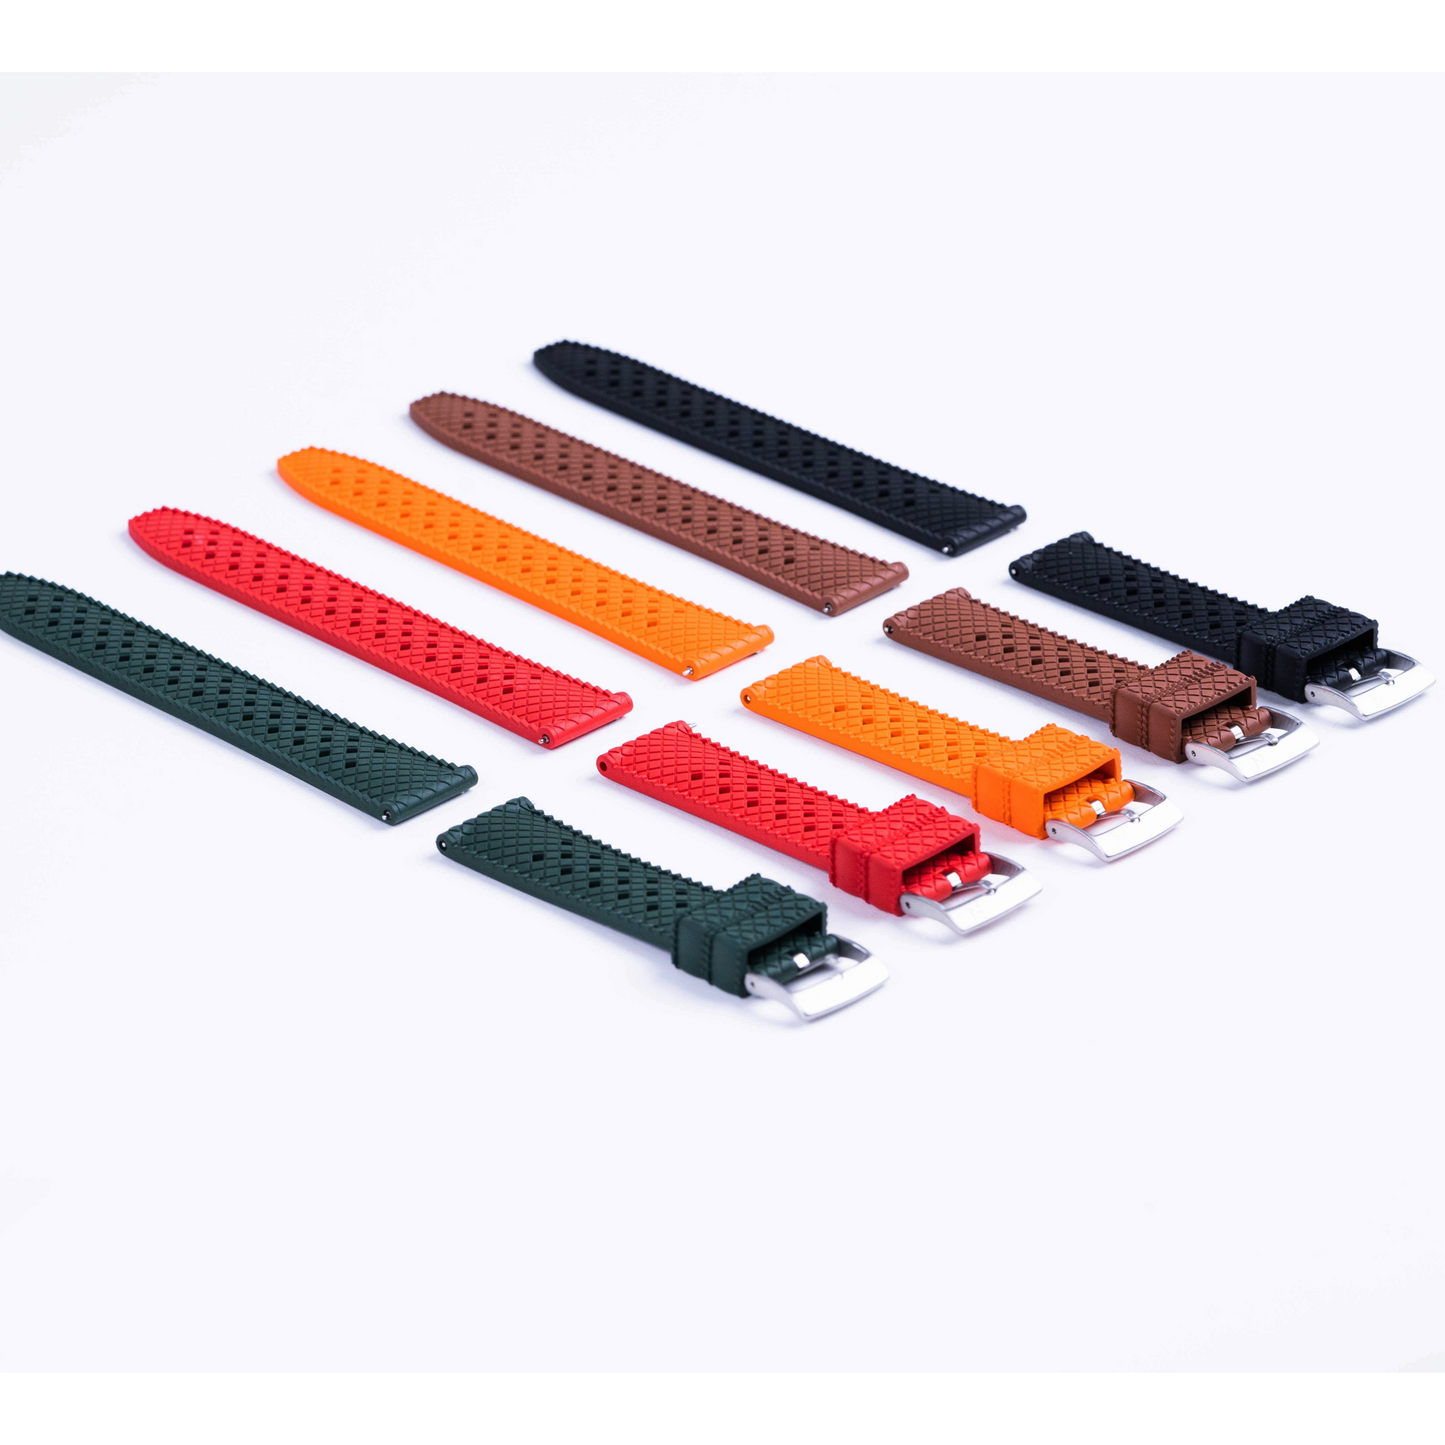 The Nomad Rubber Strap